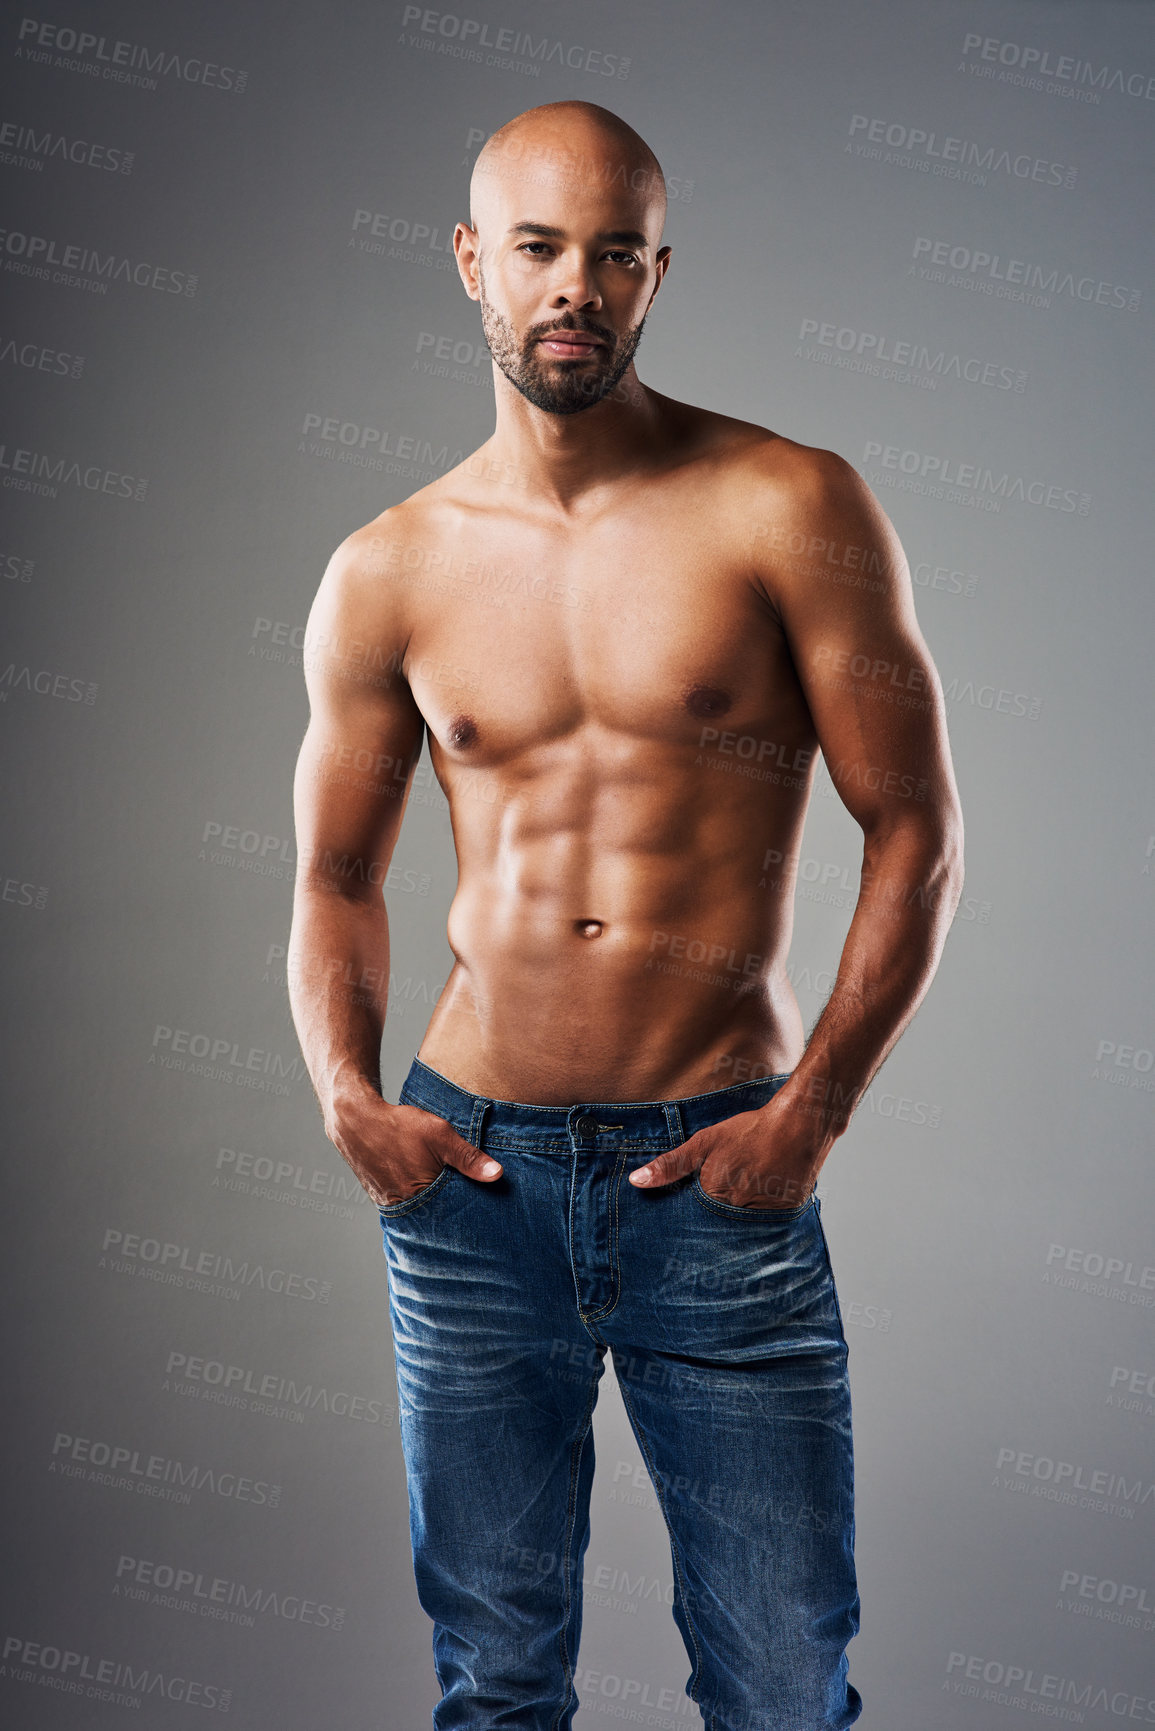 Buy stock photo Portrait of a handsome young man posing shirtless against a grey background